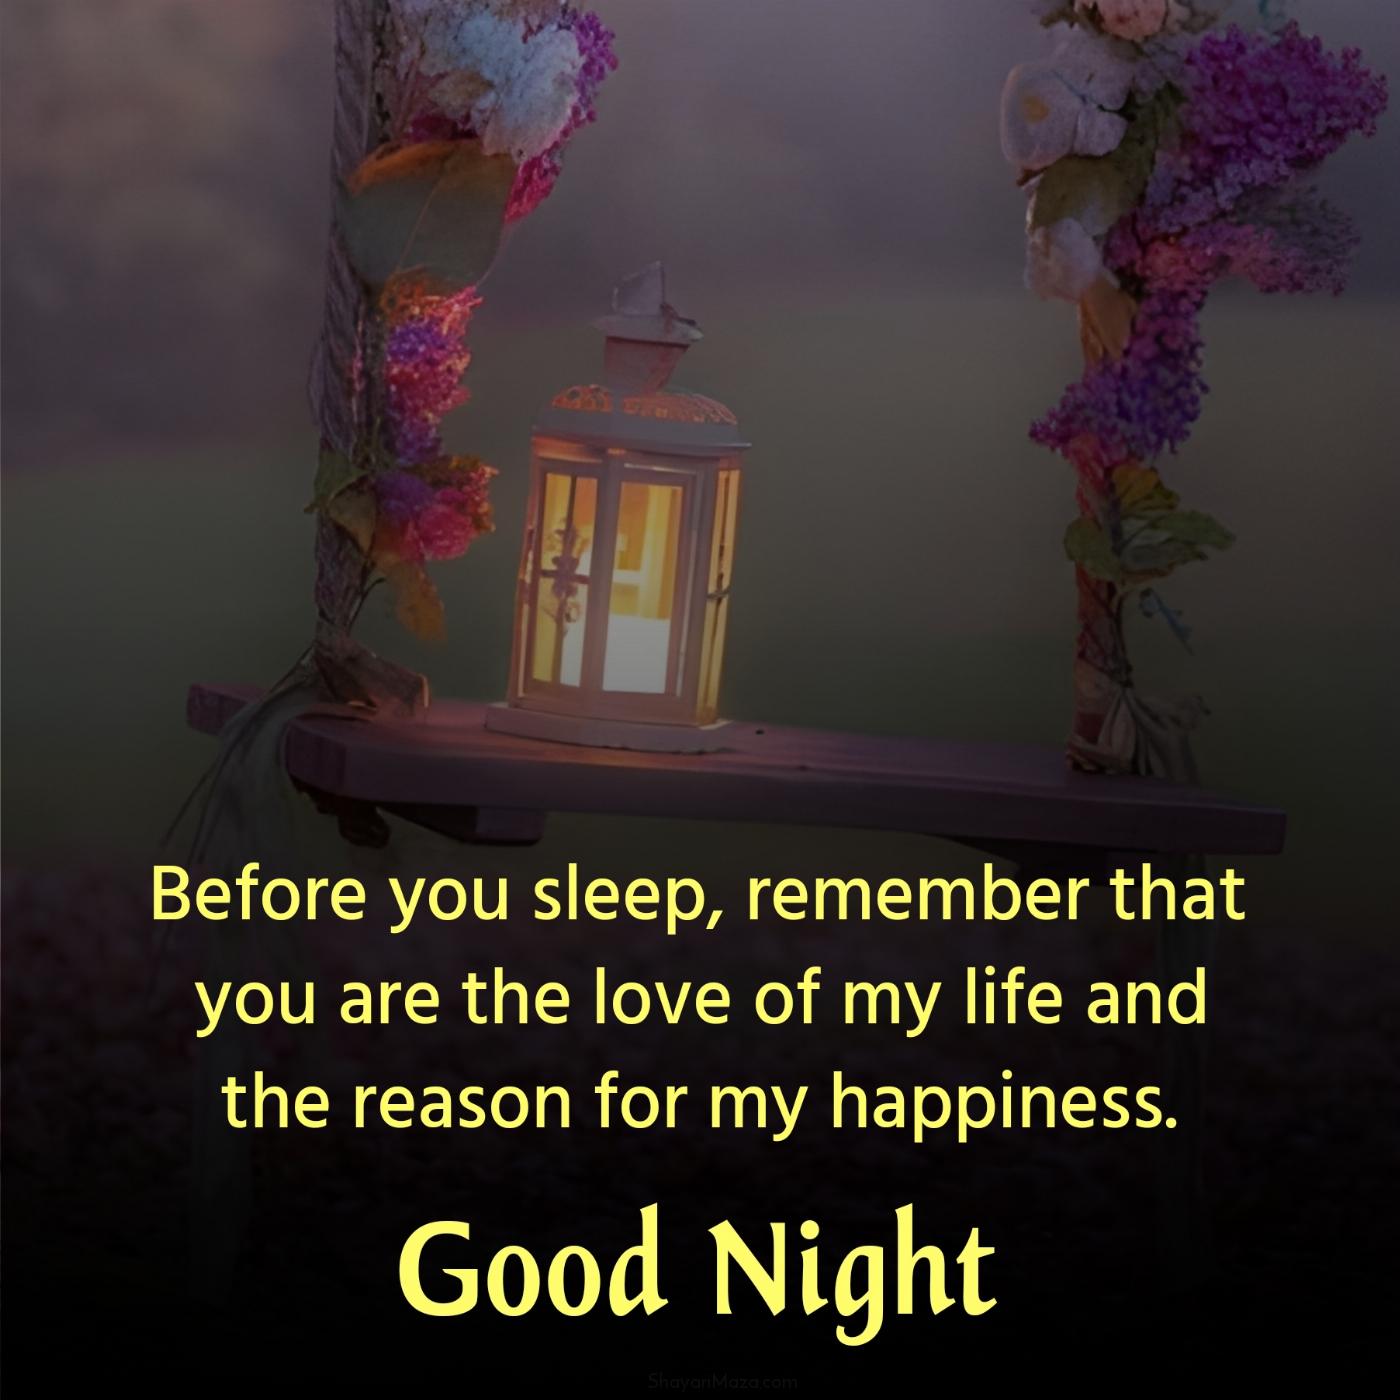 30+ Good Night Images in English for Whatsapp || Bedtime Stories in English  - Mixing Images